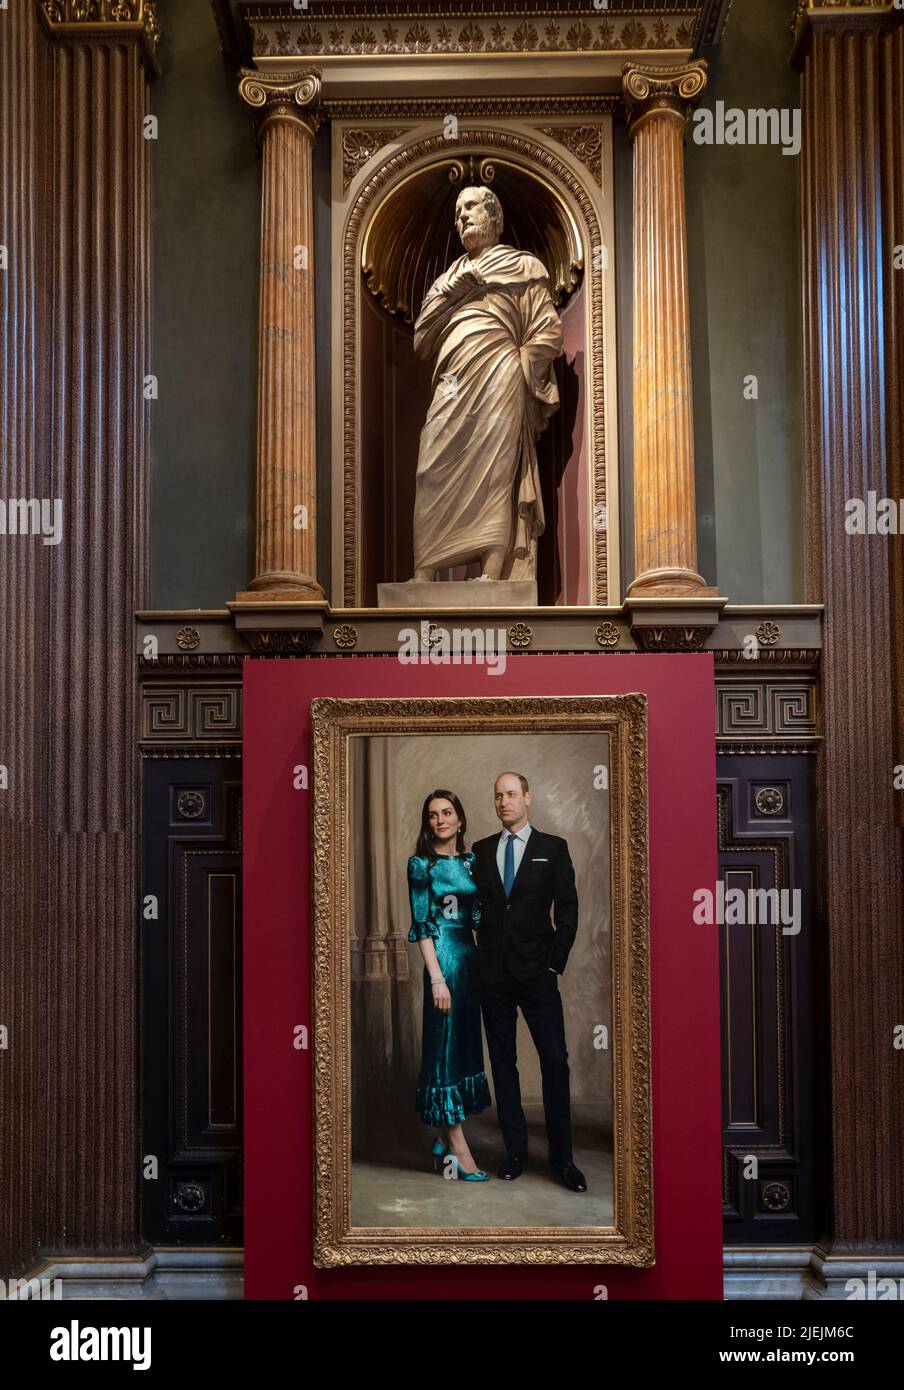 Portrait of Prince William and Catherine, Duchess of Cambridge by Jamie Coreth  in the Fitzwilliam Museum 26 June 2022 Portrait of the Duke and Duchess of Cambridge is the first official joint portrait of Prince William, Duke of Cambridge, and Catherine, Duchess of Cambridge, unveiled at the Fitzwilliam Museum on 23 June 2022 in the presence of the couple.Following an idea by Sir Michael Marshall, Jamie Coreth was commissioned in 2021 by the Cambridgeshire Royal Portrait Fund, which is held by the Cambridge Community Foundation, to paint a portrait of the Duke and Duchess as a gift to Cambridg Stock Photo